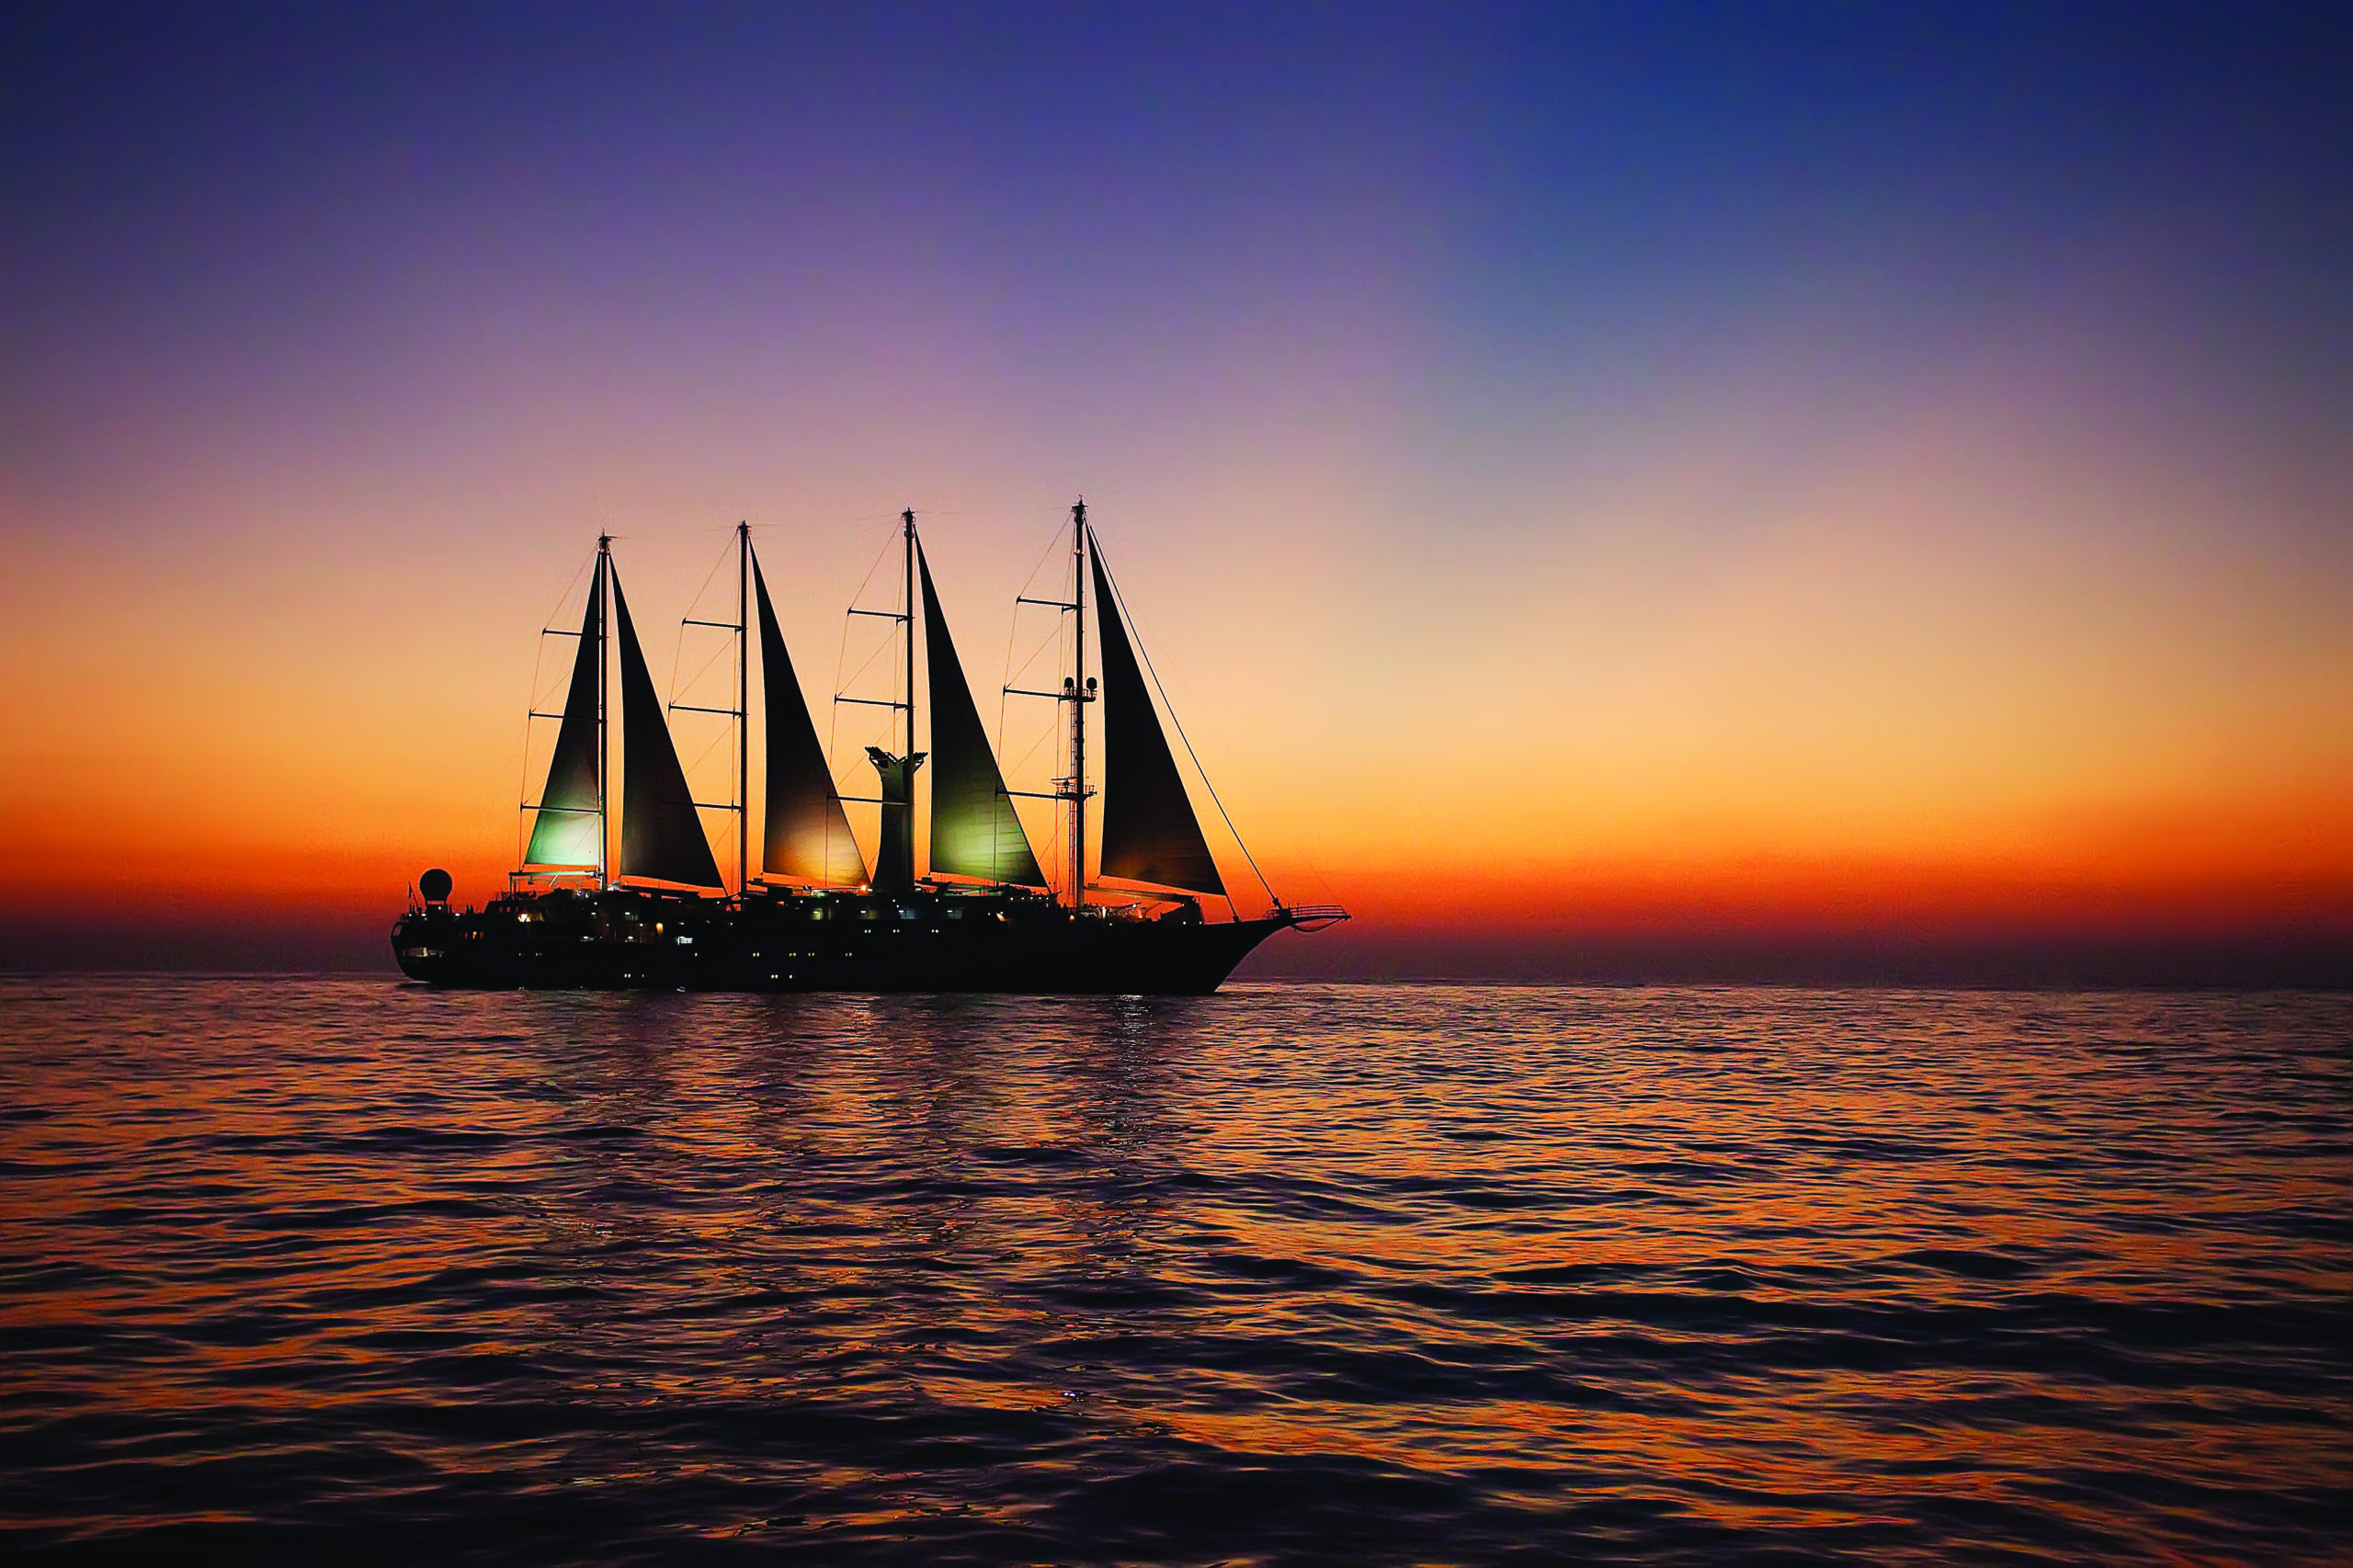 Greece is the Word Windstar Cruises “Wind Star” Sets Sail for